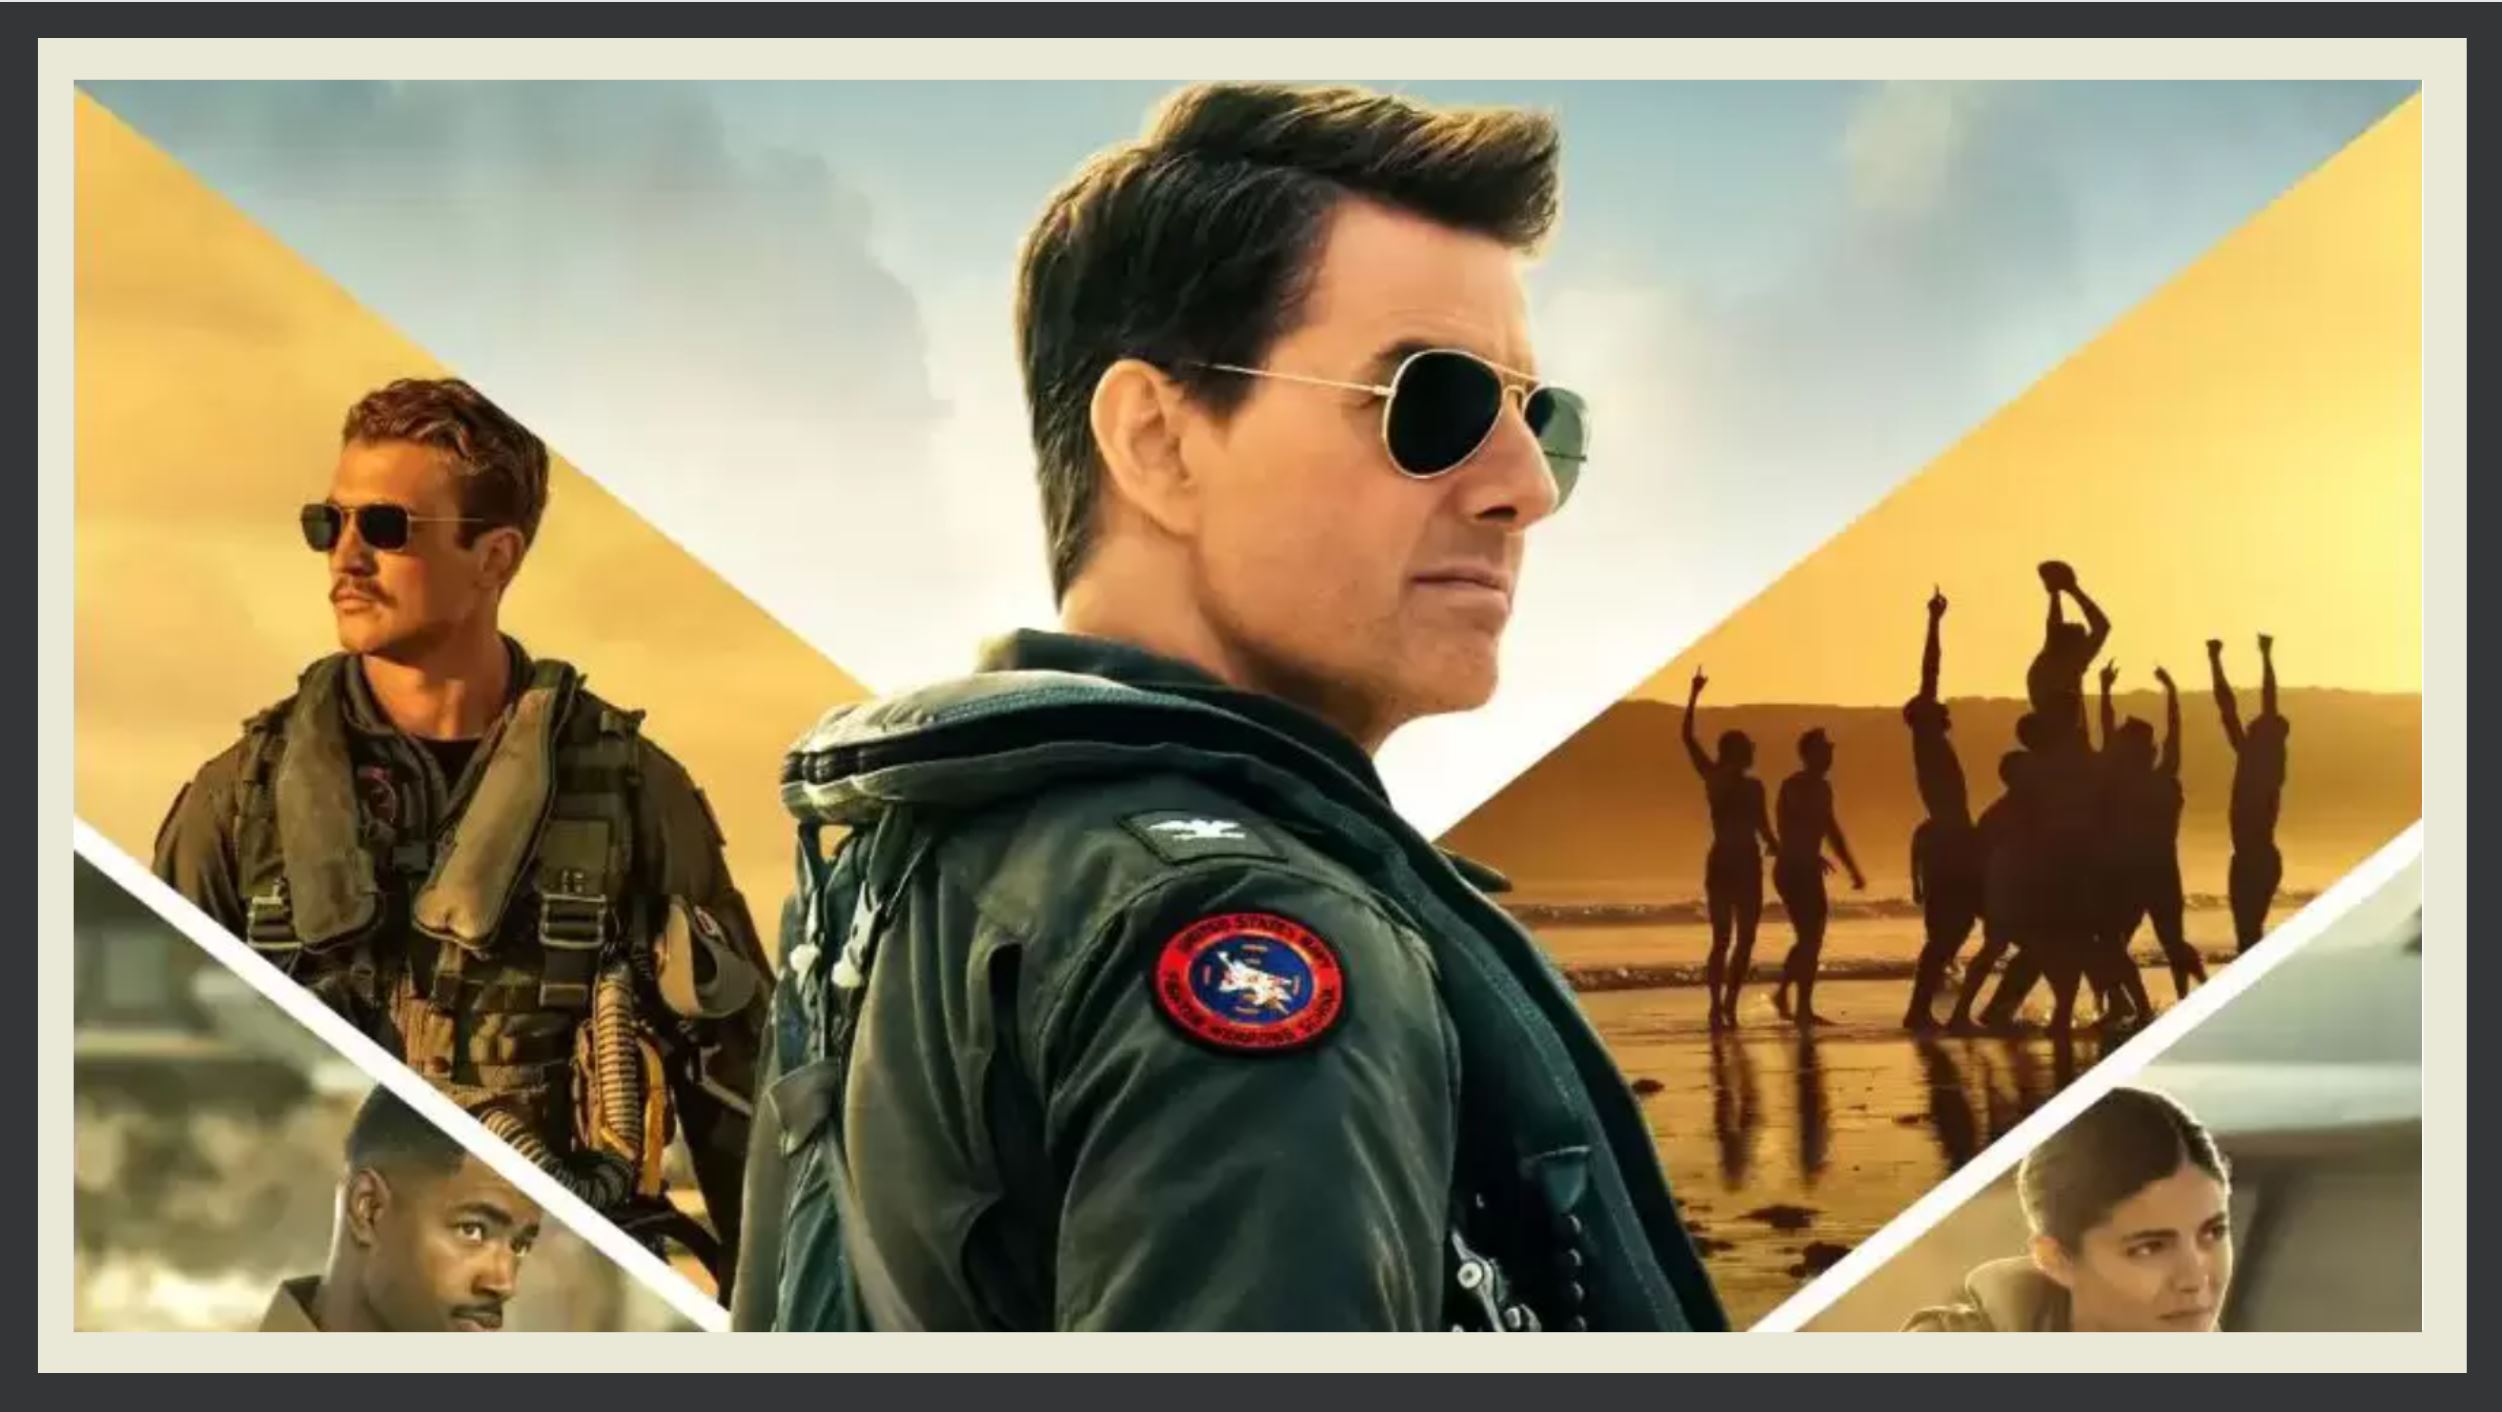 Top Gun: Maverick' Review: Tom Cruise Is Sequel's Only Source of Charm